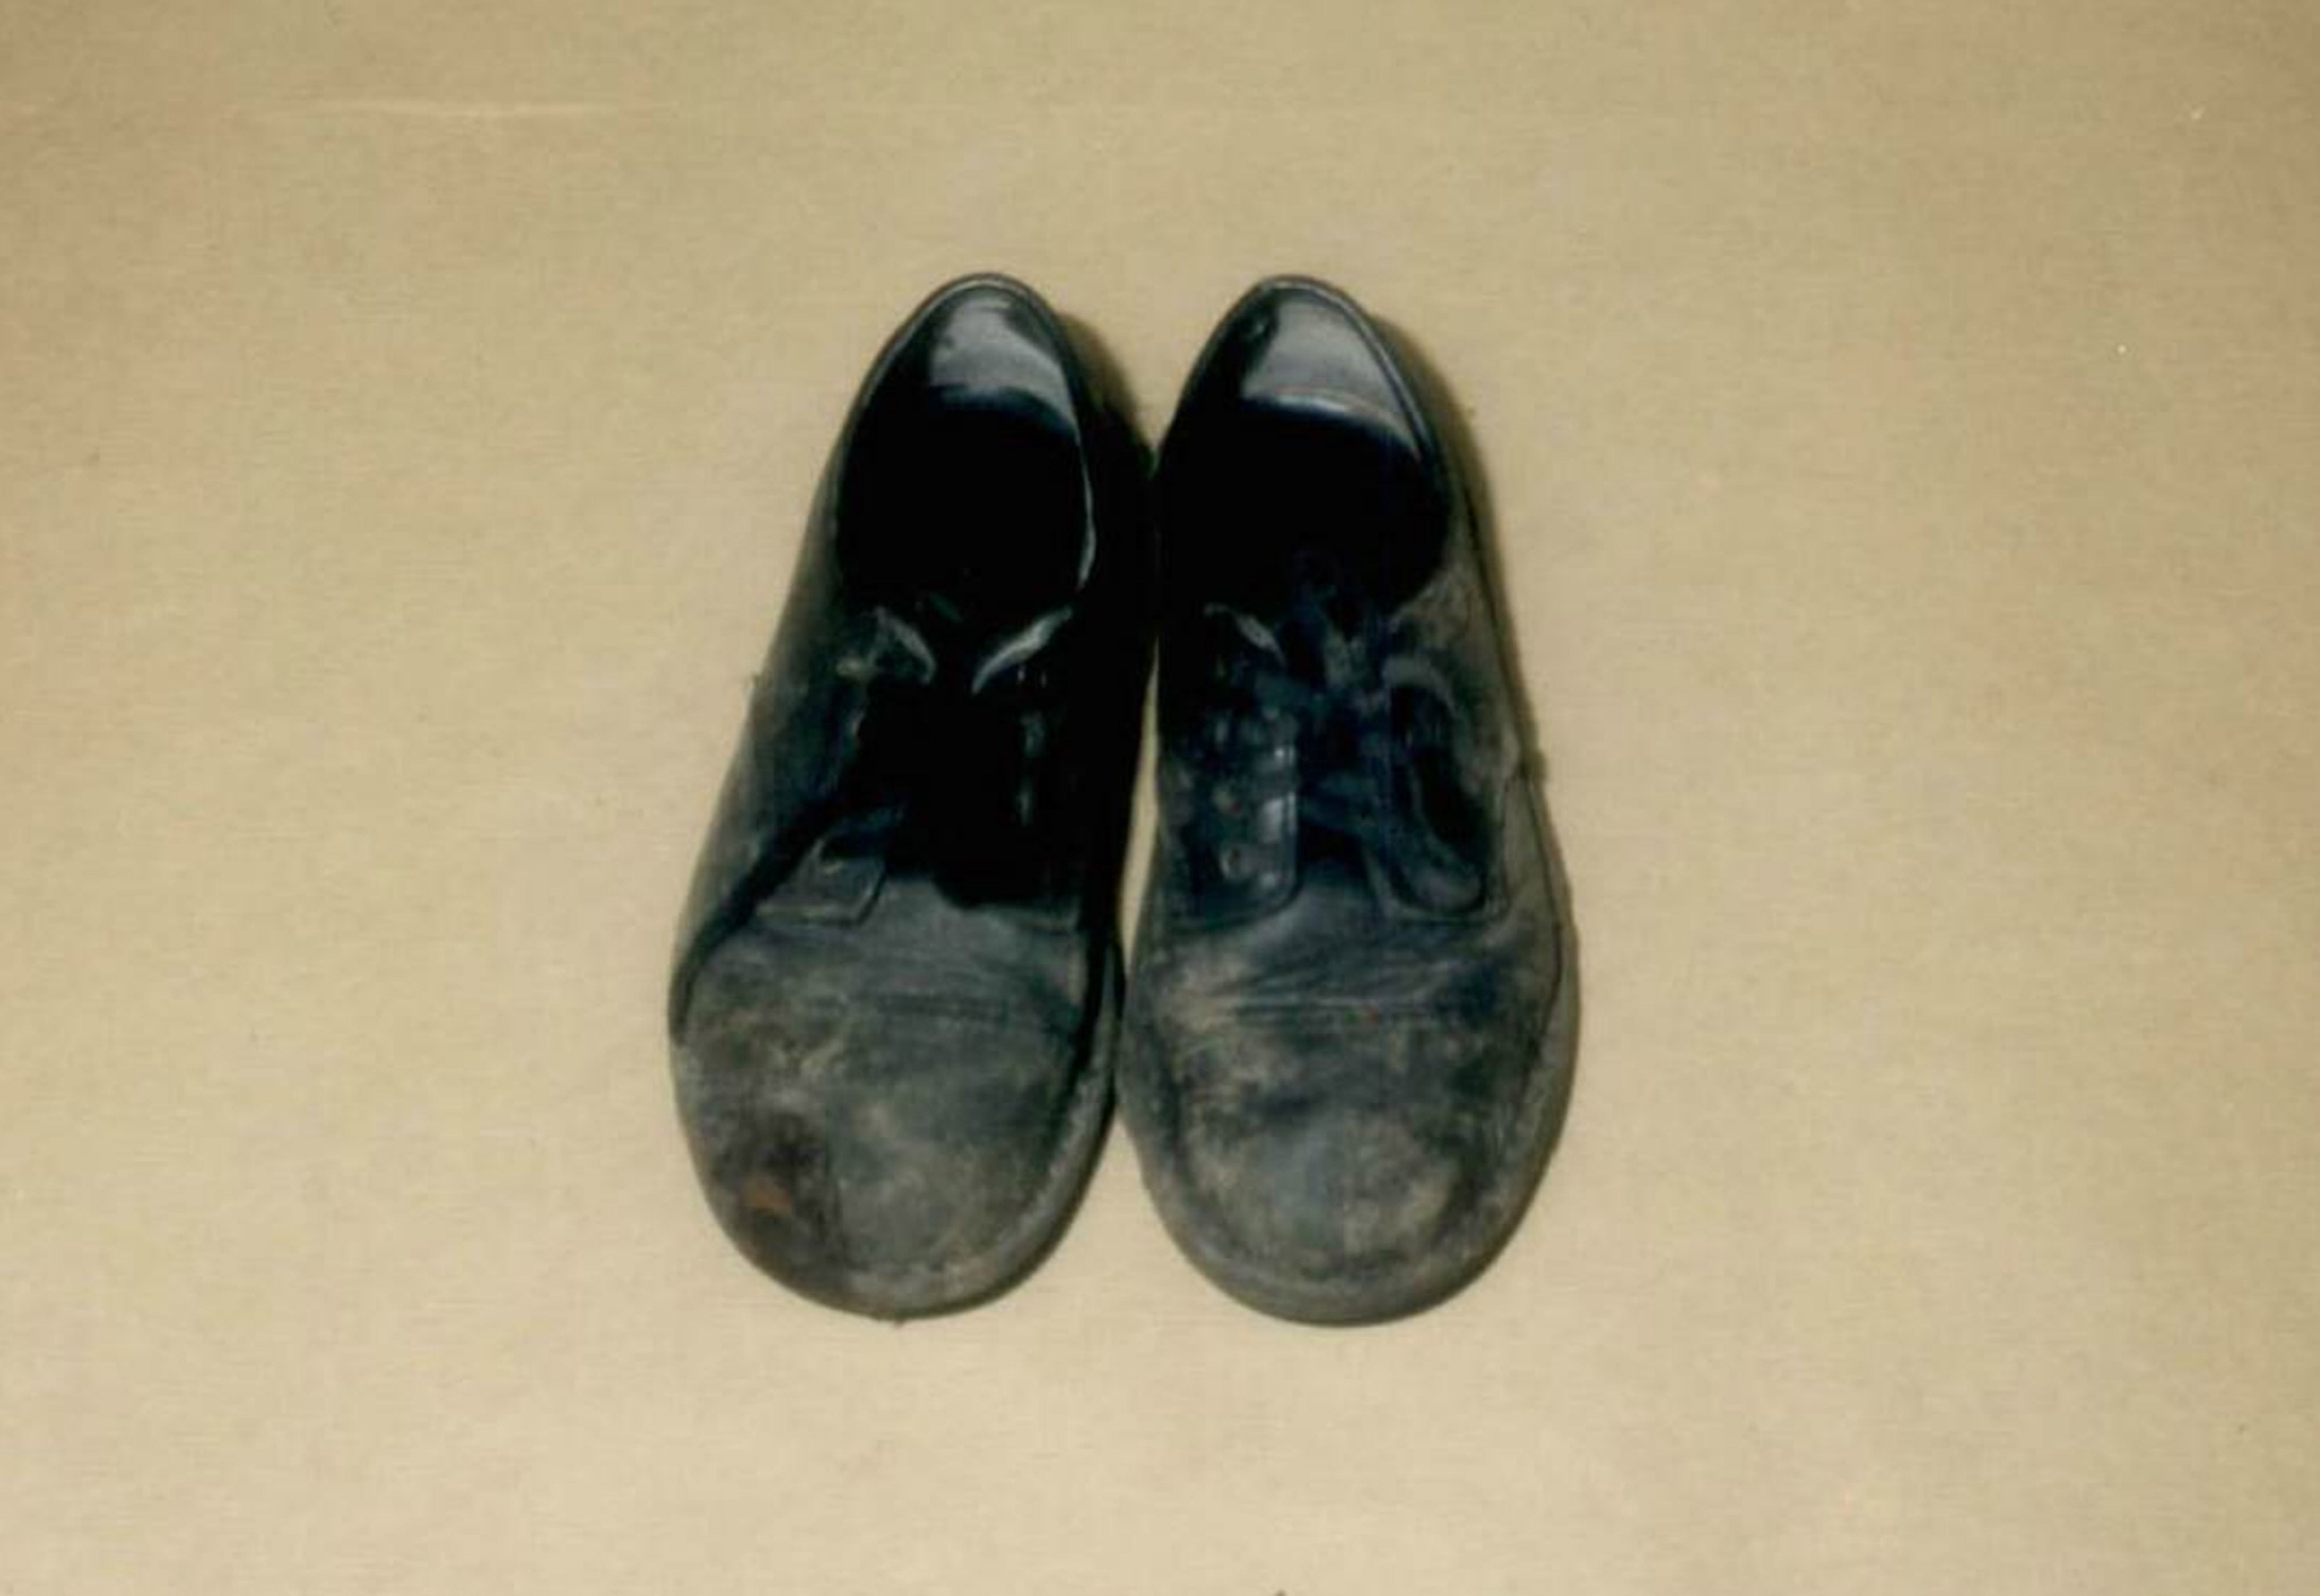 The shoes Rikki Neave was wearing when he was killed and were recovered from a bin near to the spot where his body was found (CPS/PA)